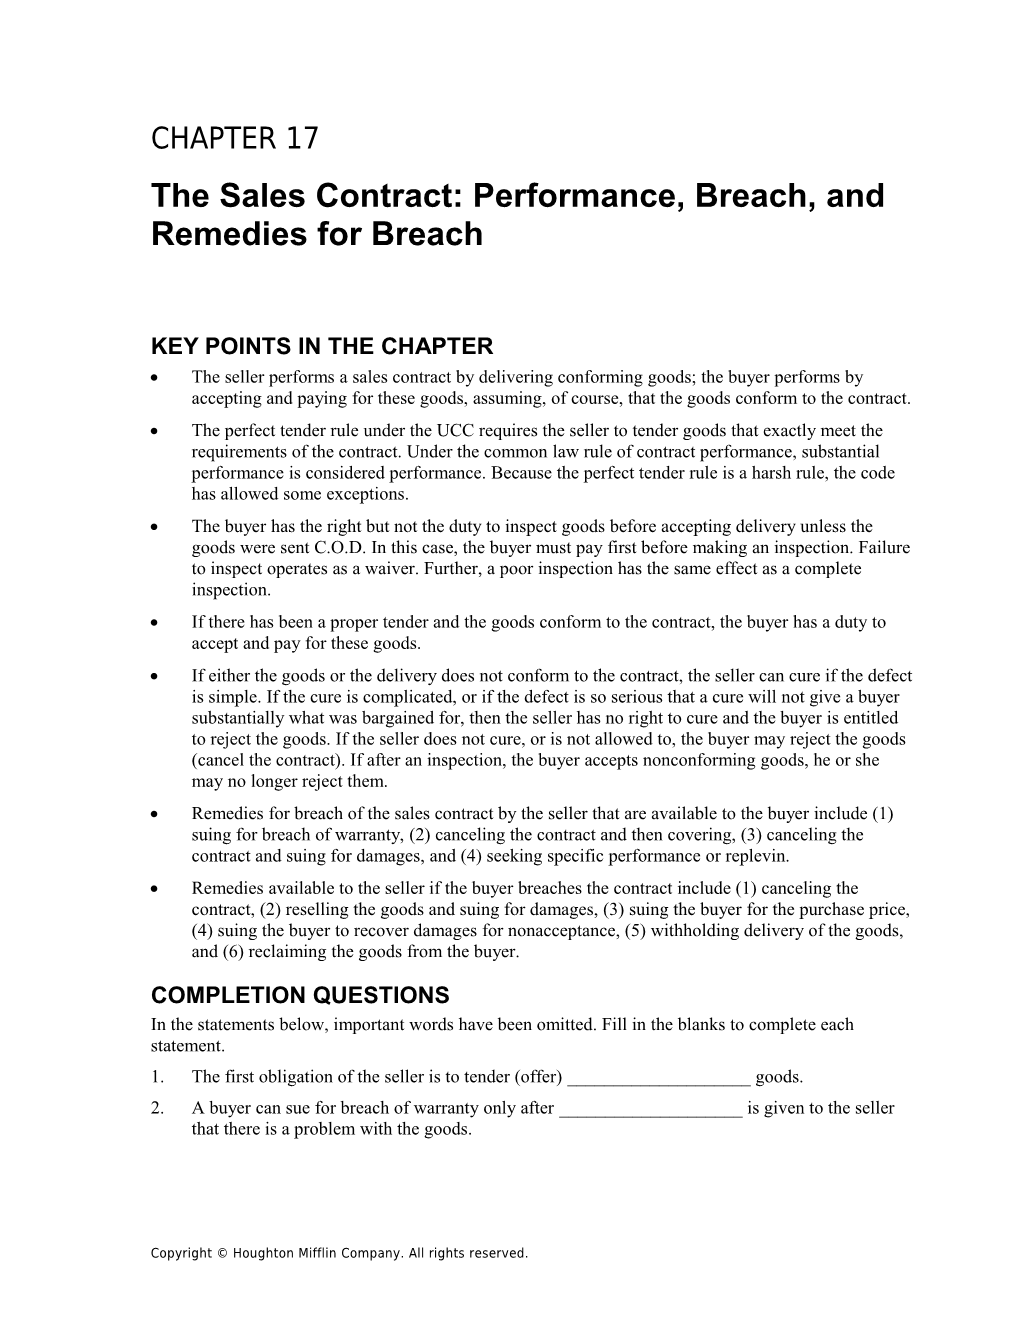 The Sales Contract: Performance, Breach, and Remedies for Breach